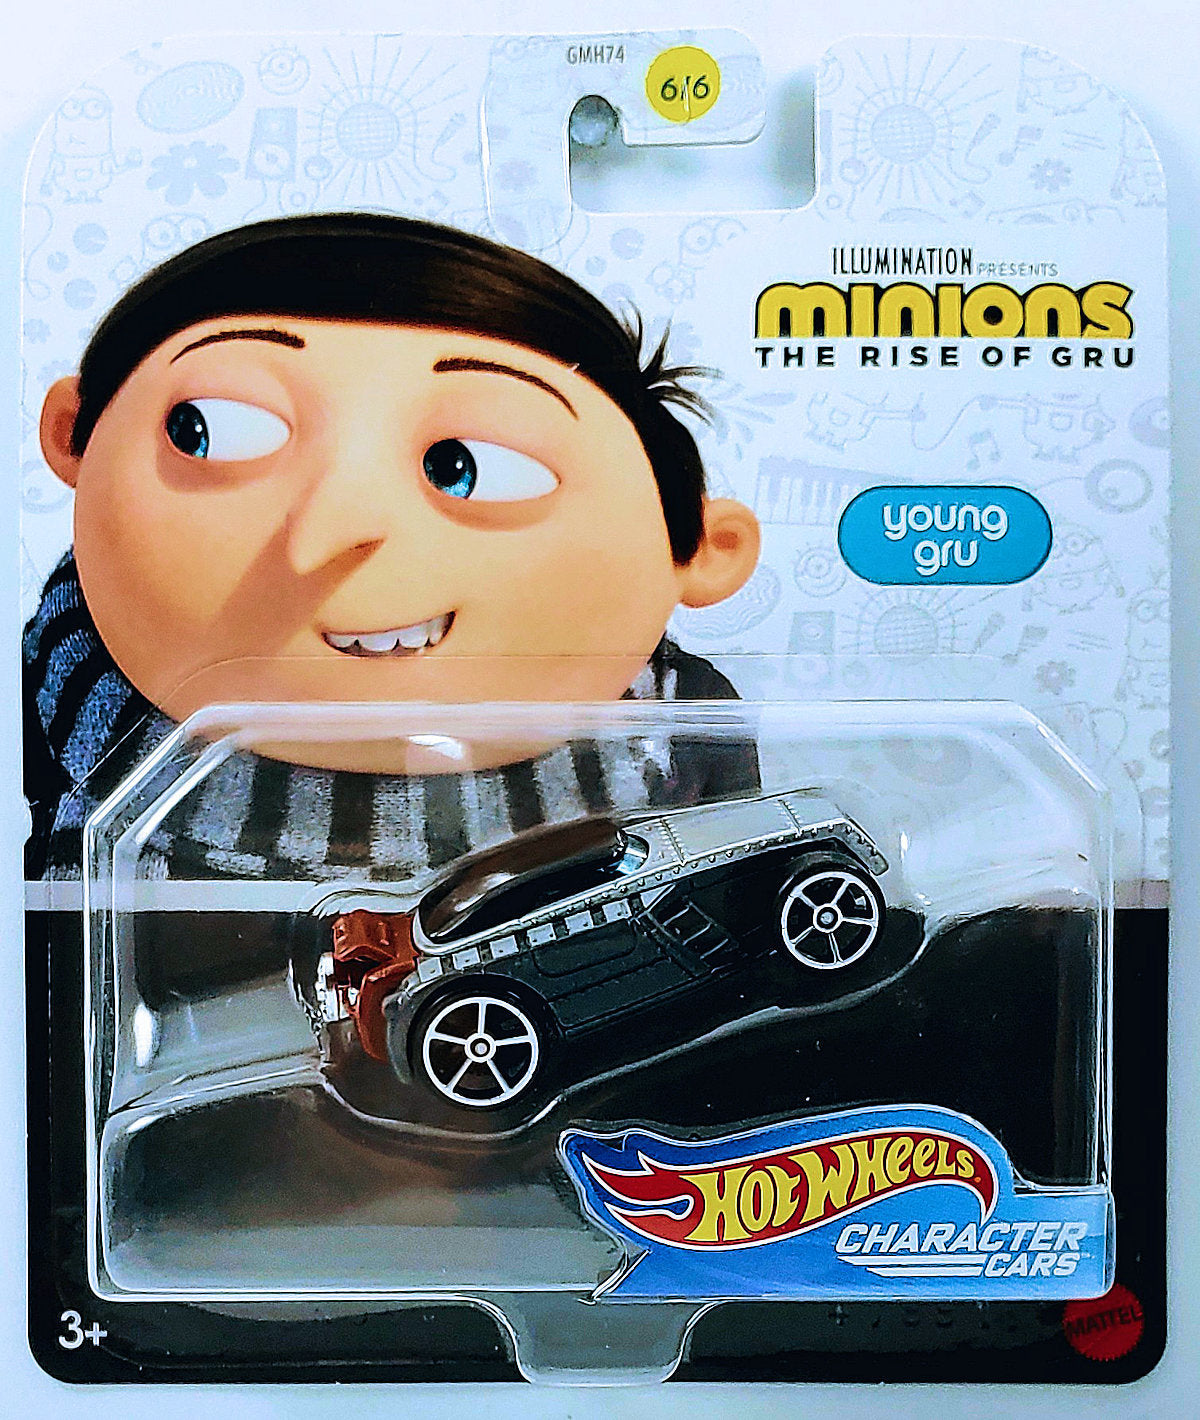 Hot Wheels 2020 - Character Cars - Minions: The Rise of Gru 6/6 - young gru - Gray